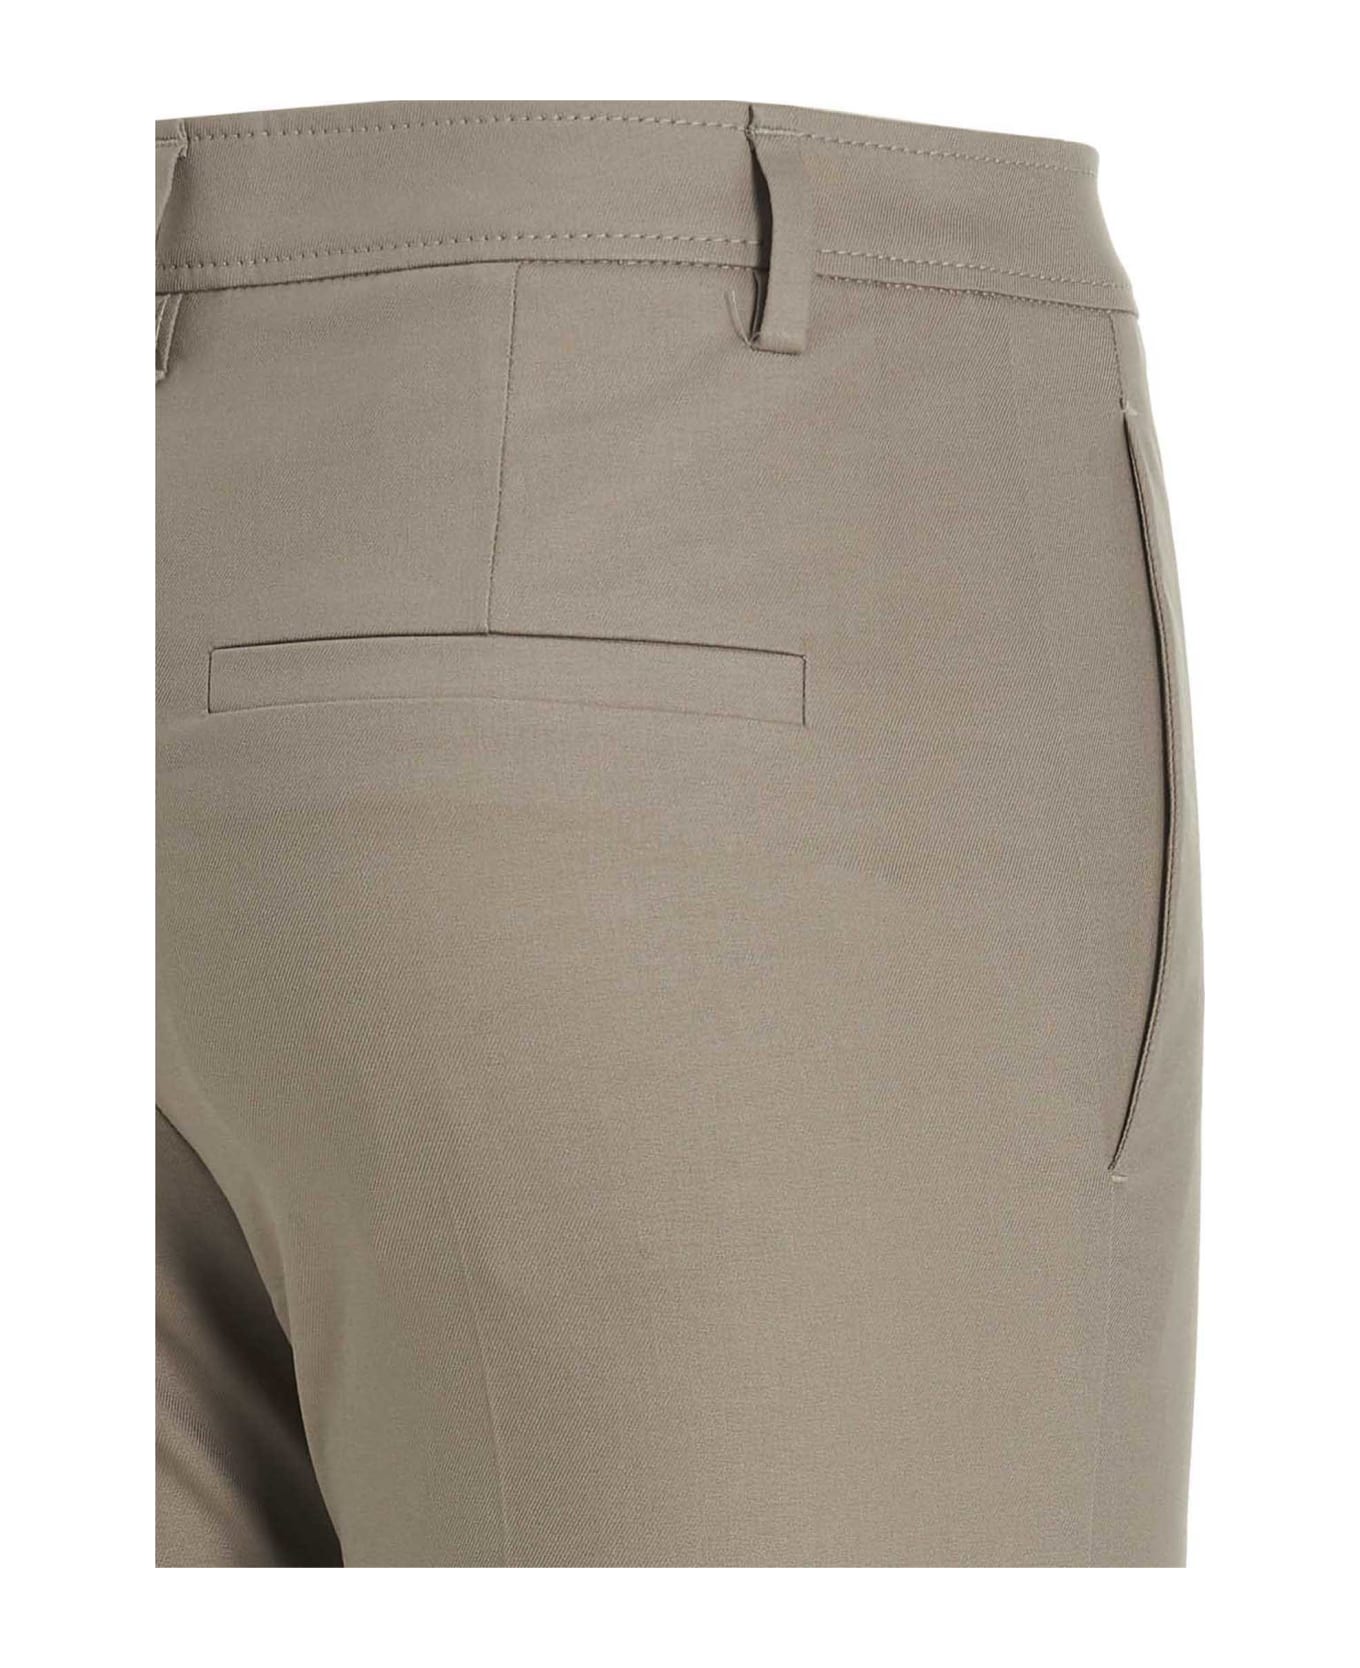 Brunello Cucinelli Boyfit Cigarette Trousers In Stretch Cotton Twill With Waist Loop Embellished With Jewels - Beige ボトムス